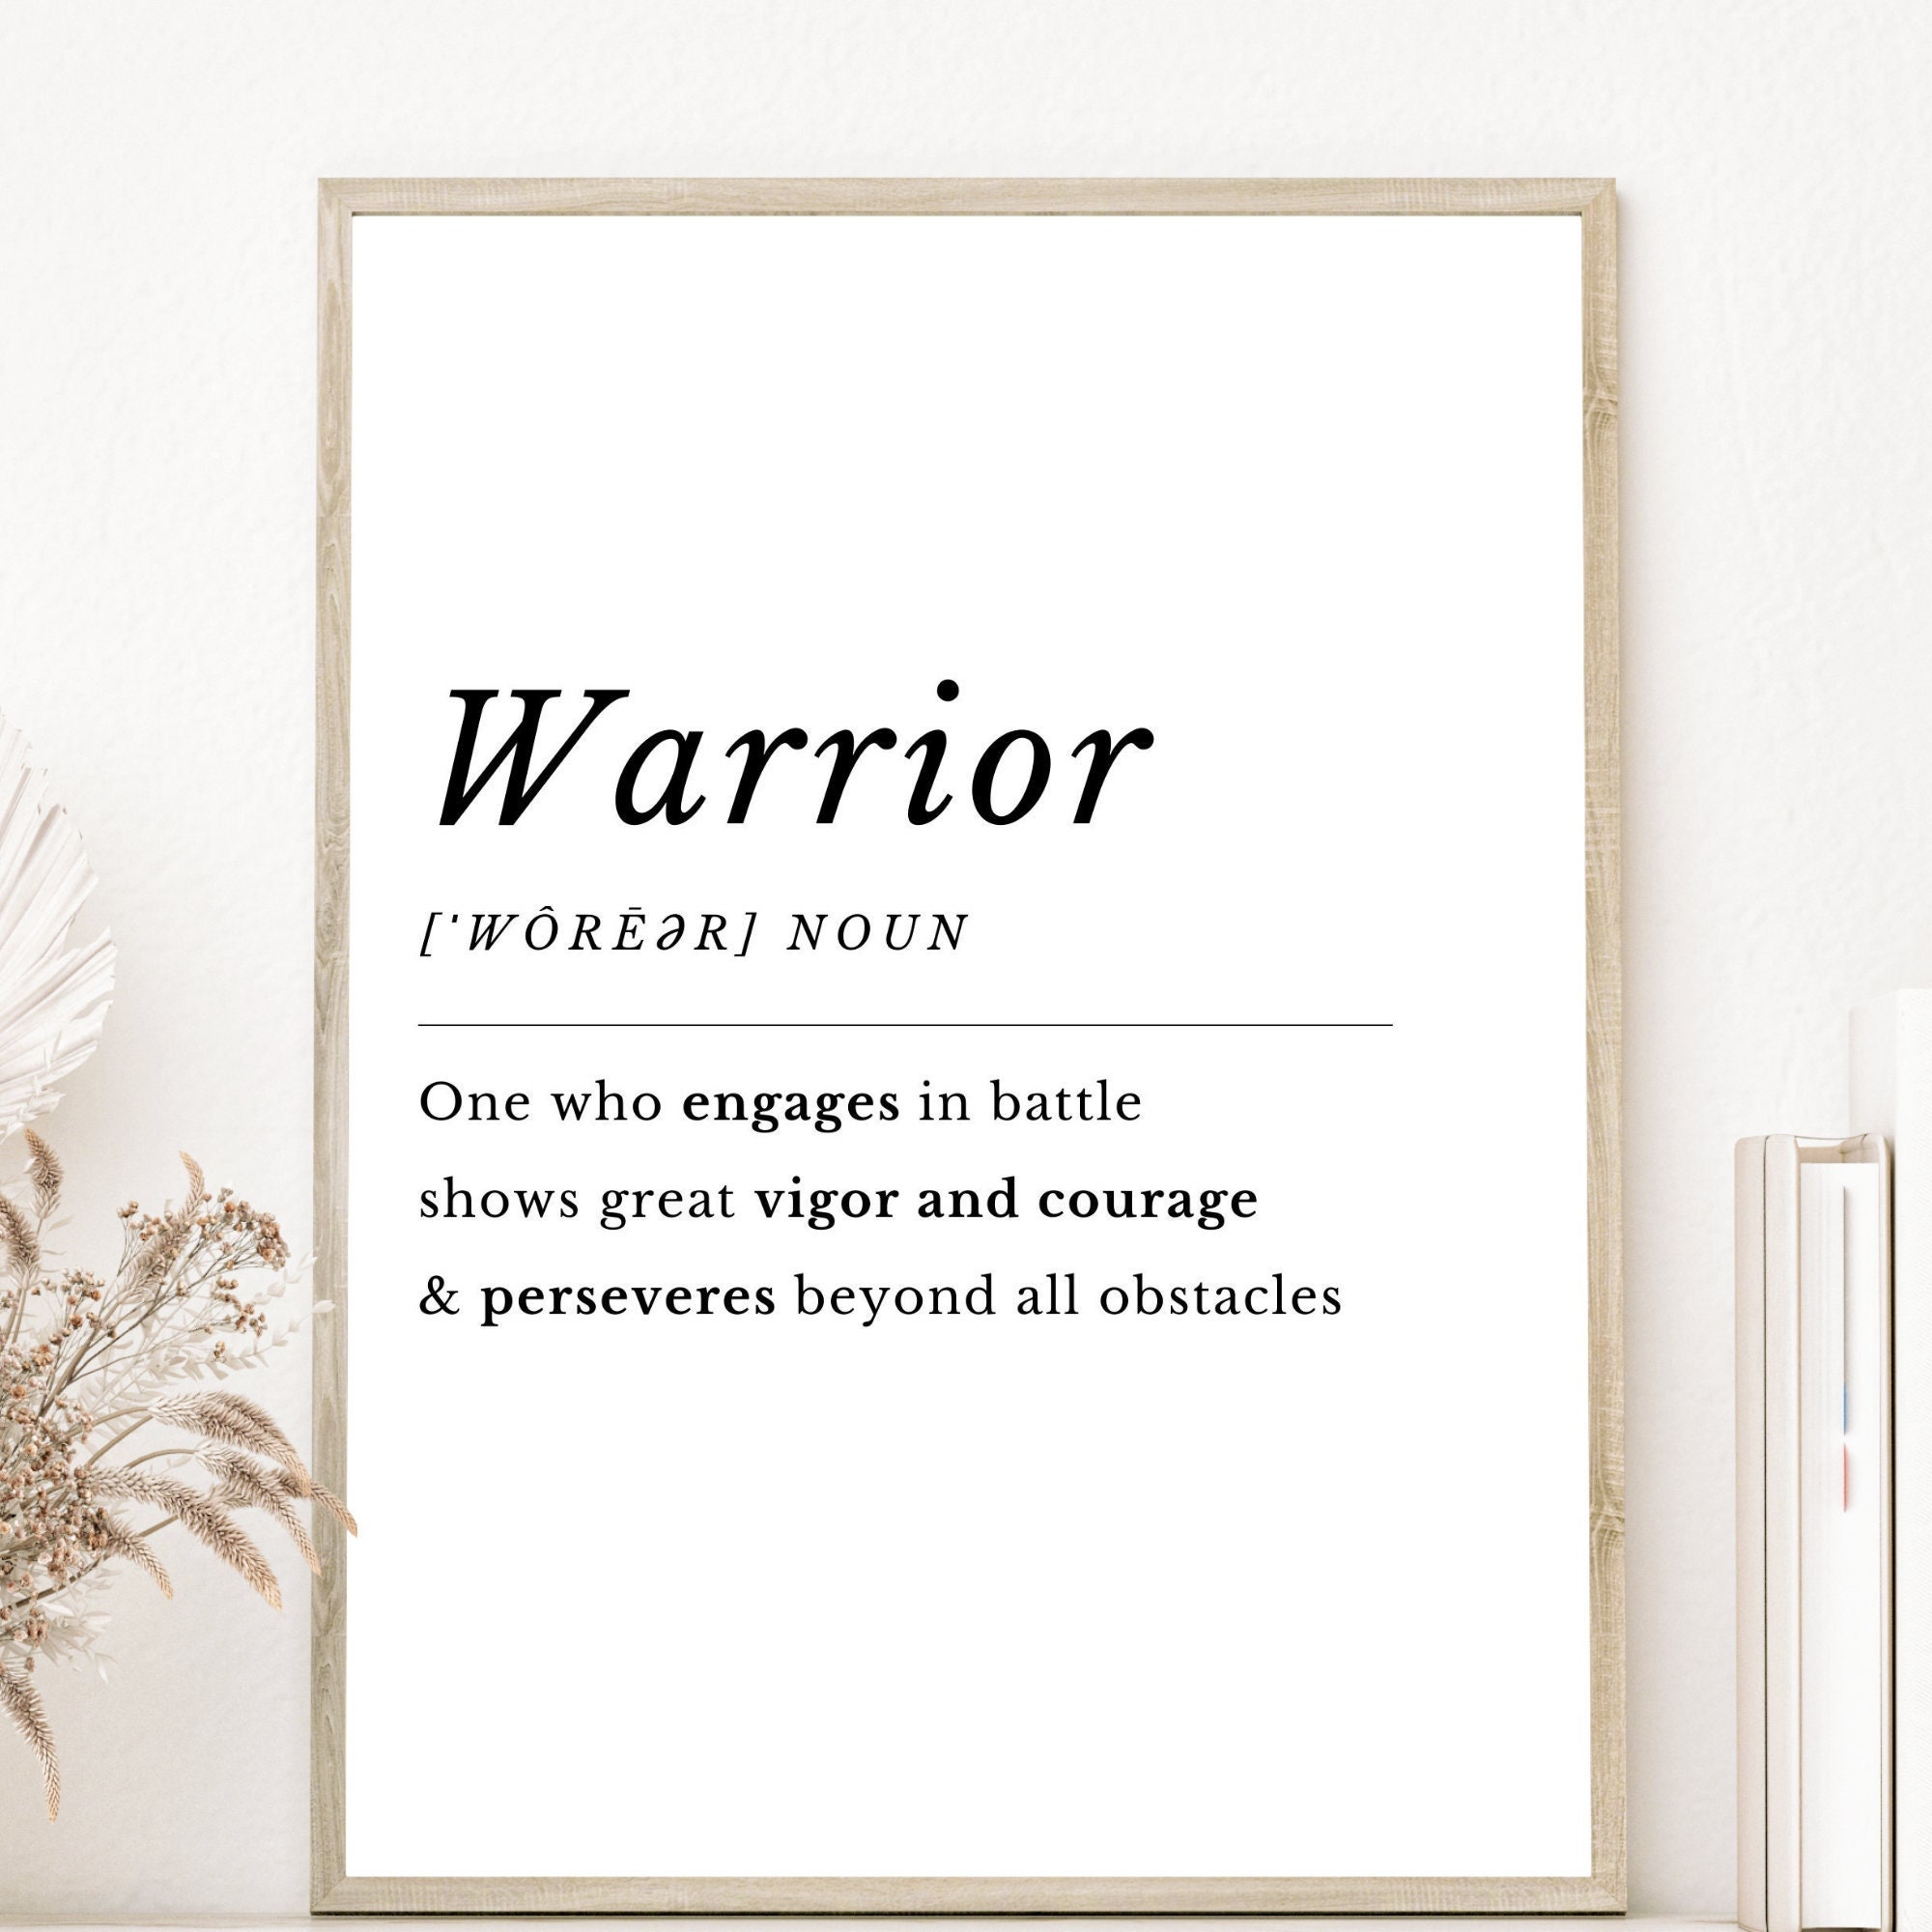 WARRIOR - Definition and synonyms of warrior in the English dictionary